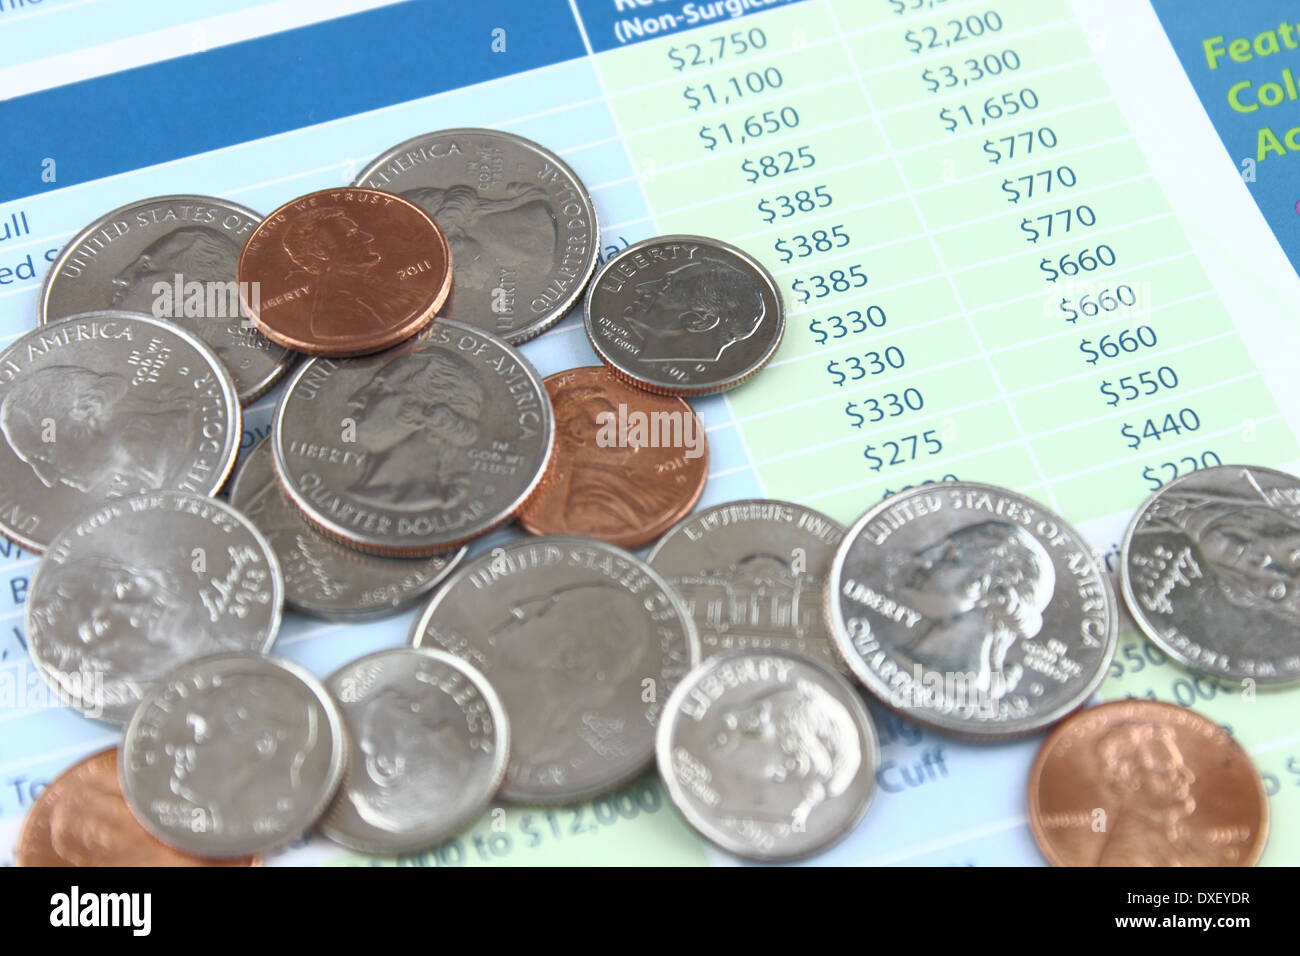 US Coins on a Financial Document Stock Photo